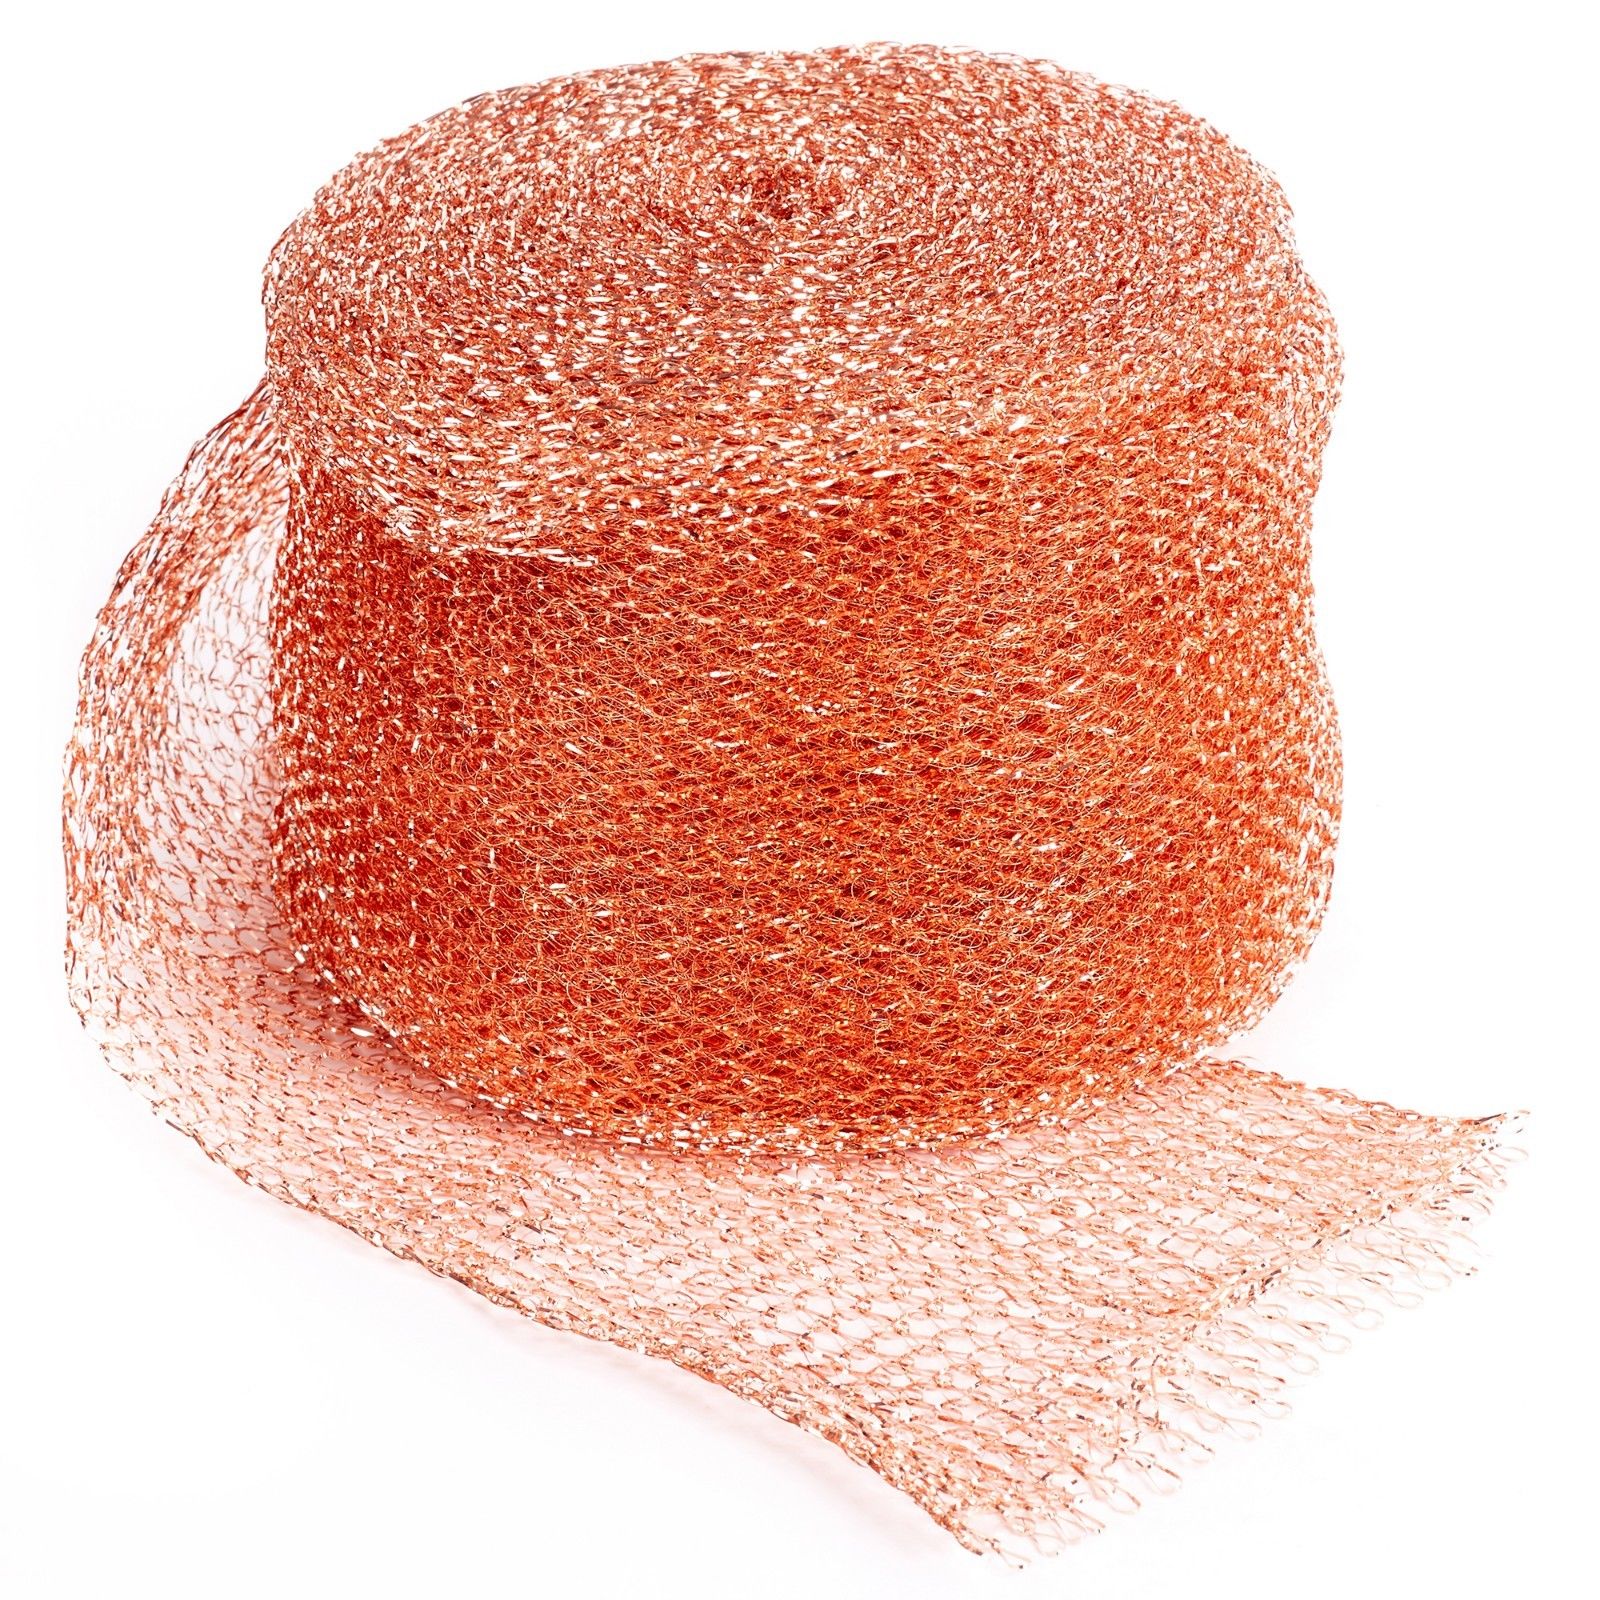 Copper Pest & Rodent Control Mesh Roll 5 inches wide; In 10, 25